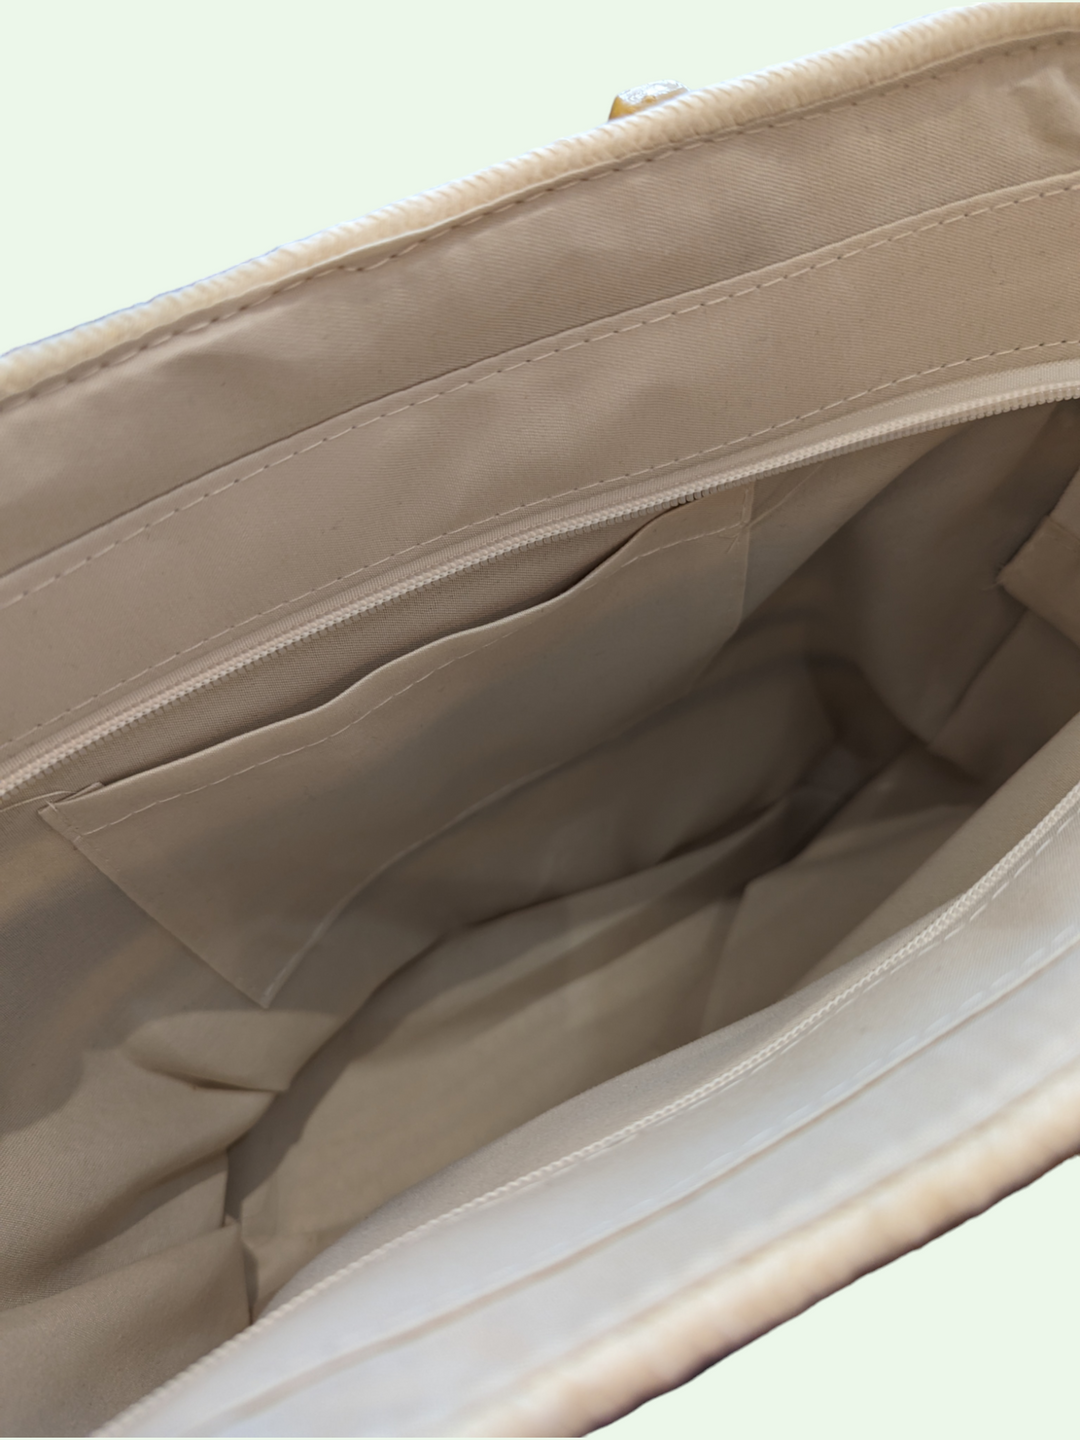 an inside view of the tote bag showing us the lining and the slip pocket